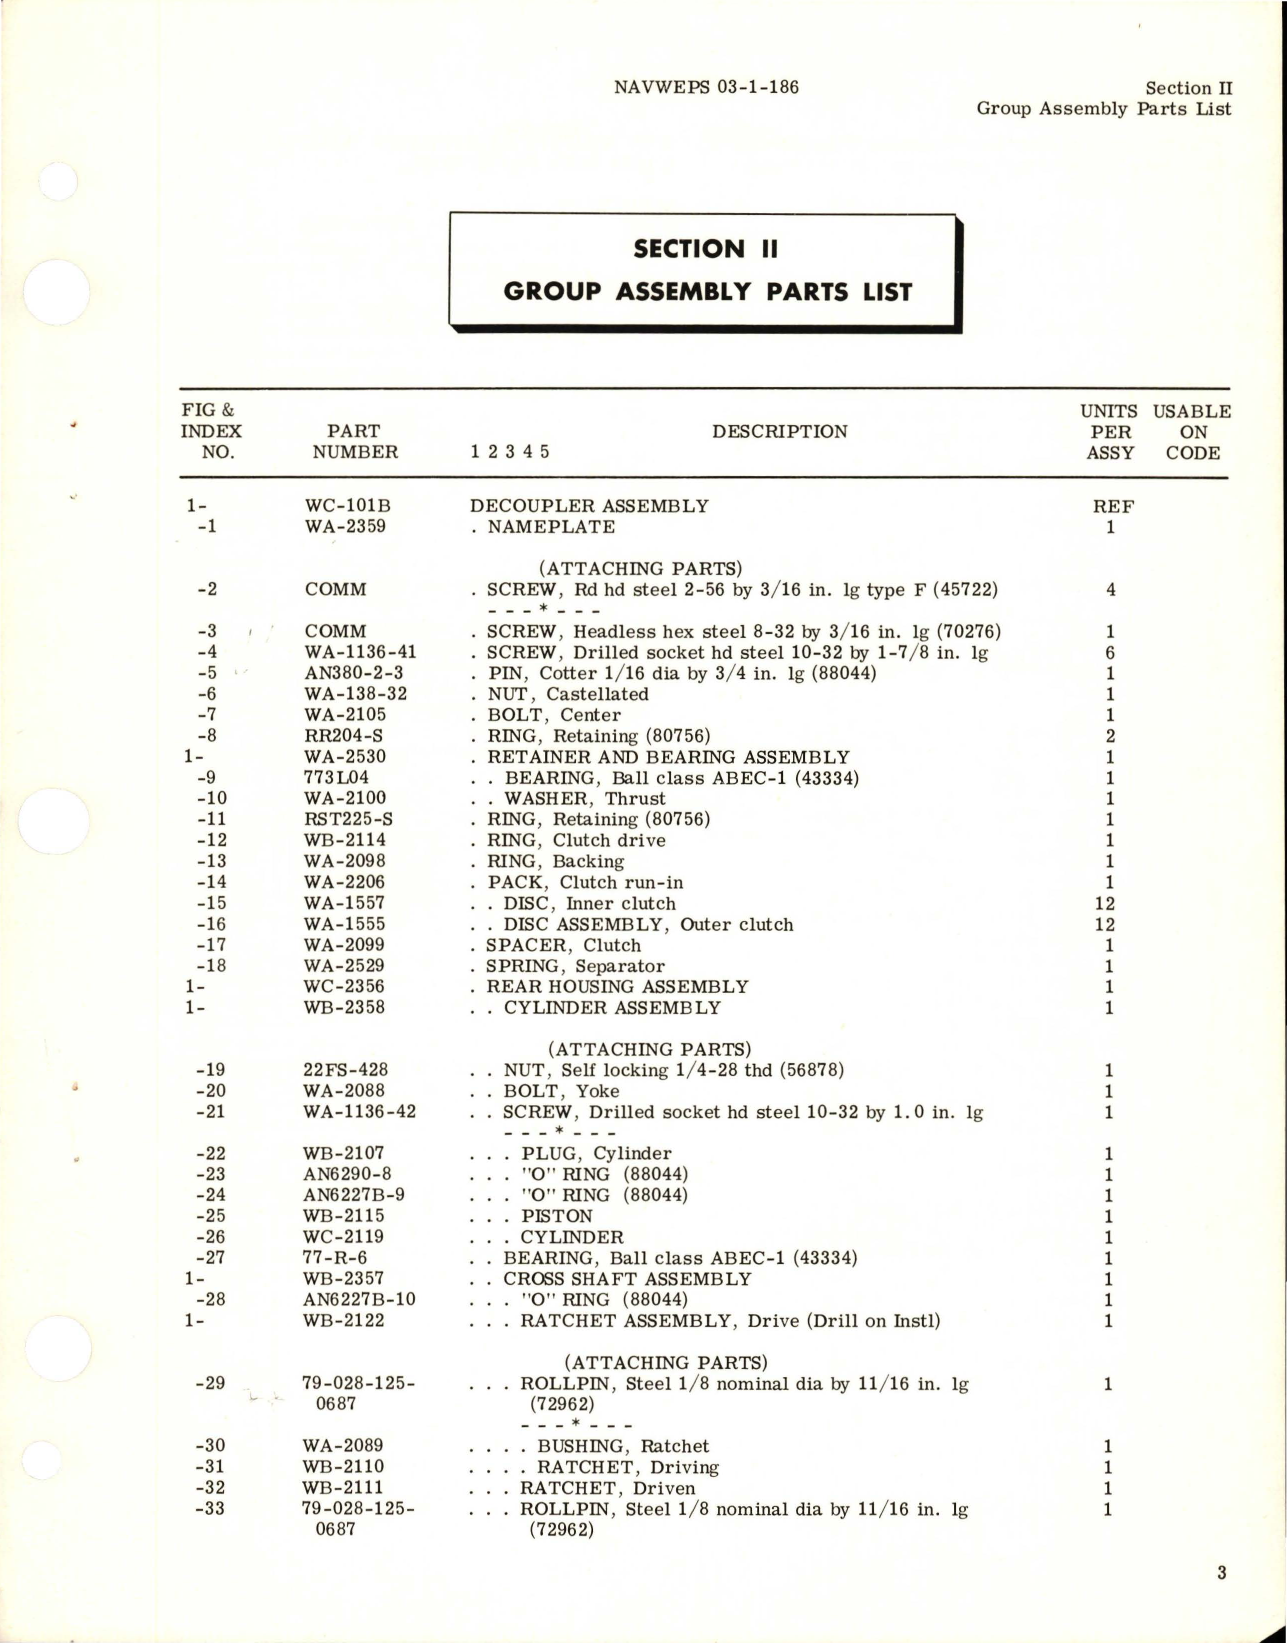 Sample page 5 from AirCorps Library document: Illustrated Parts Breakdown for Decoupler Assembly - Model 110B - Part WC-101B